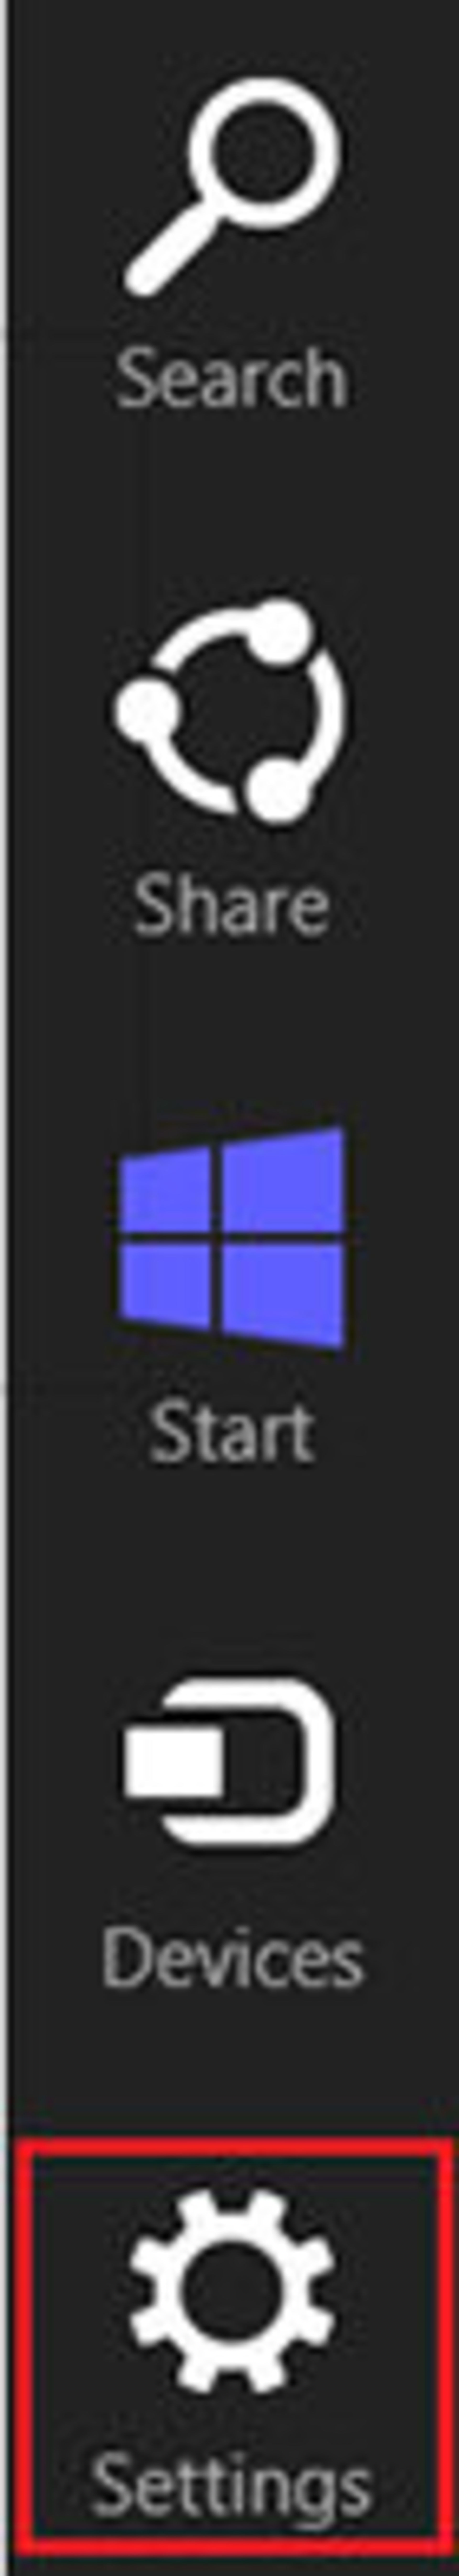 sync-mail-win8-3